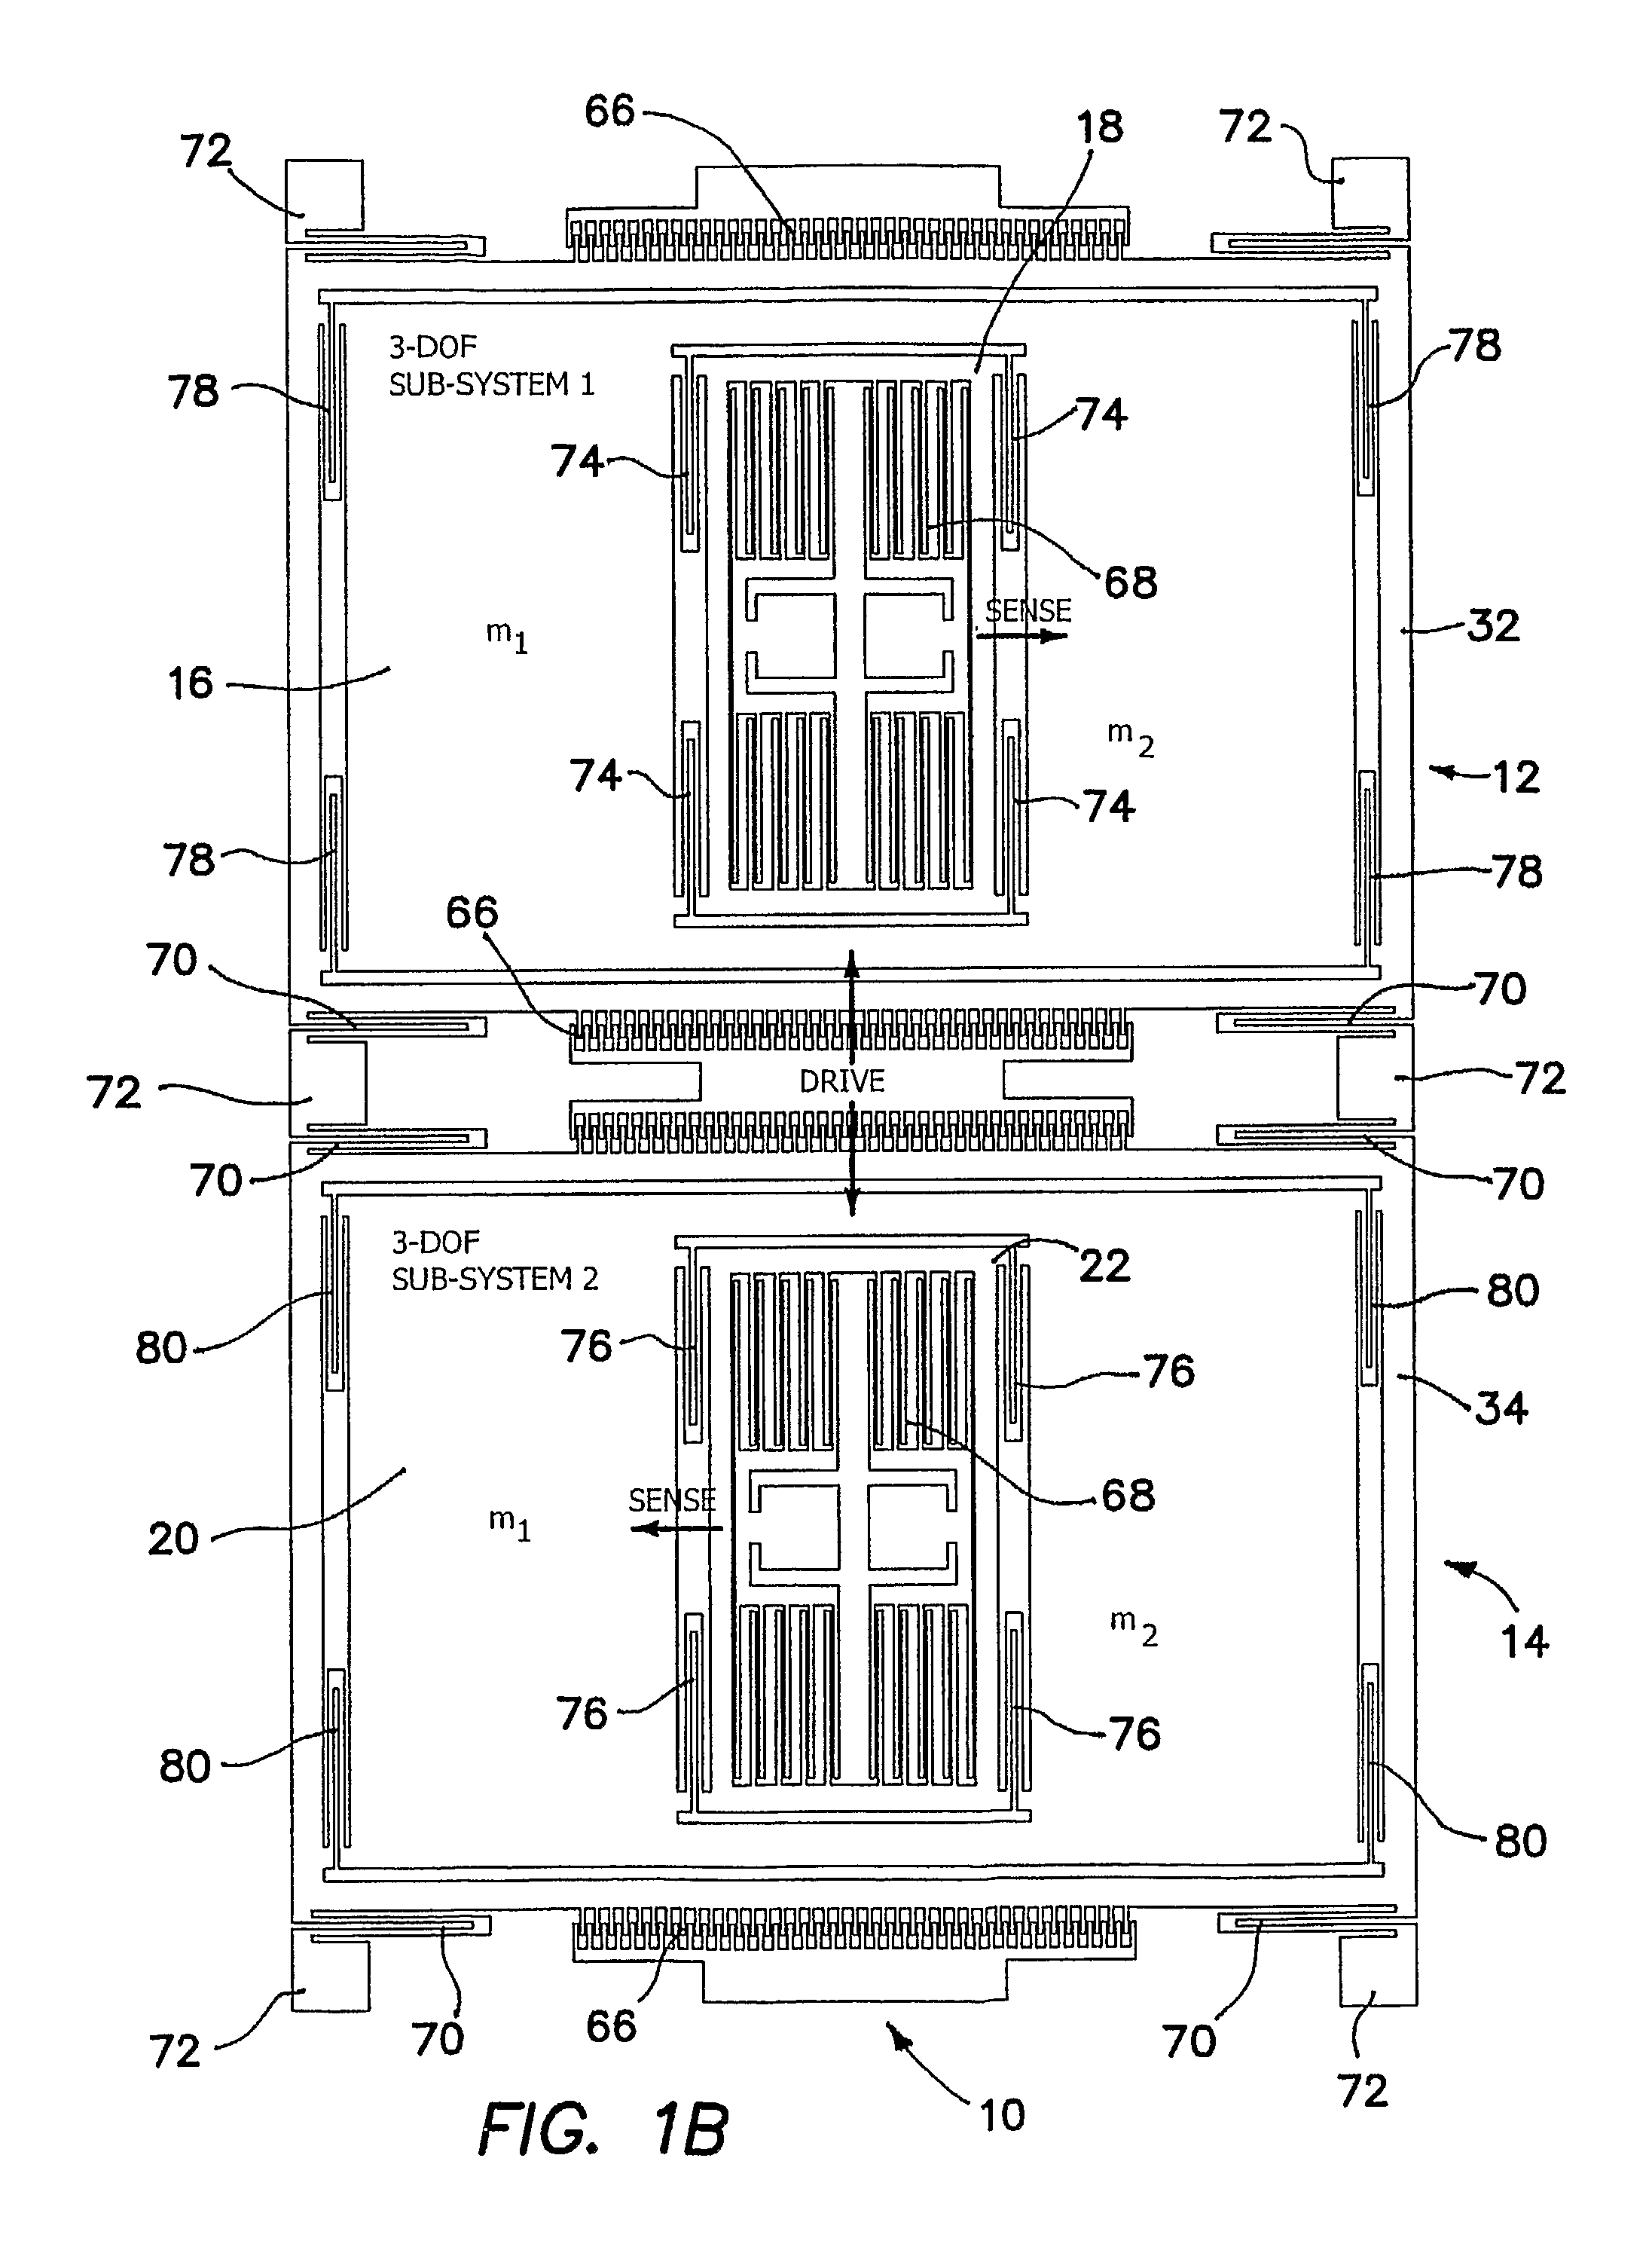 Robust six degree-of-freedom micromachined gyroscope with anti-phase drive scheme and method of operation of the same